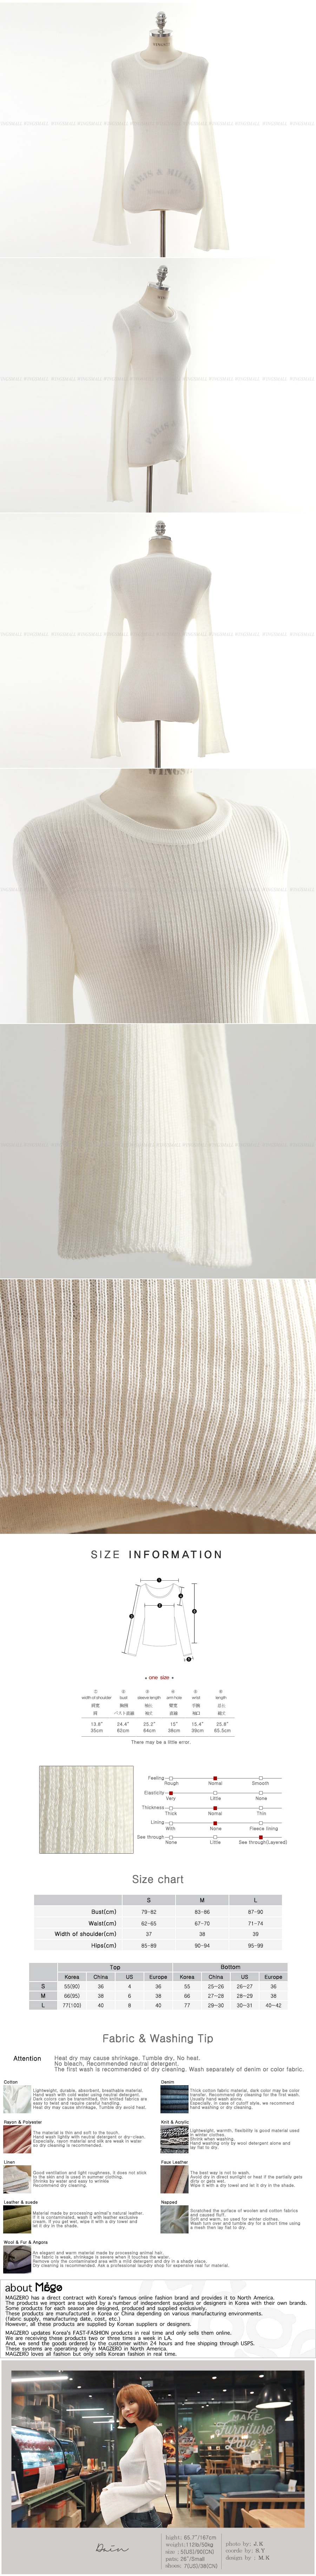 KOREA Jewel Neck Bell Sleeve Ribbed Knit Top Ivory One Size(S-M) [Free Shipping]